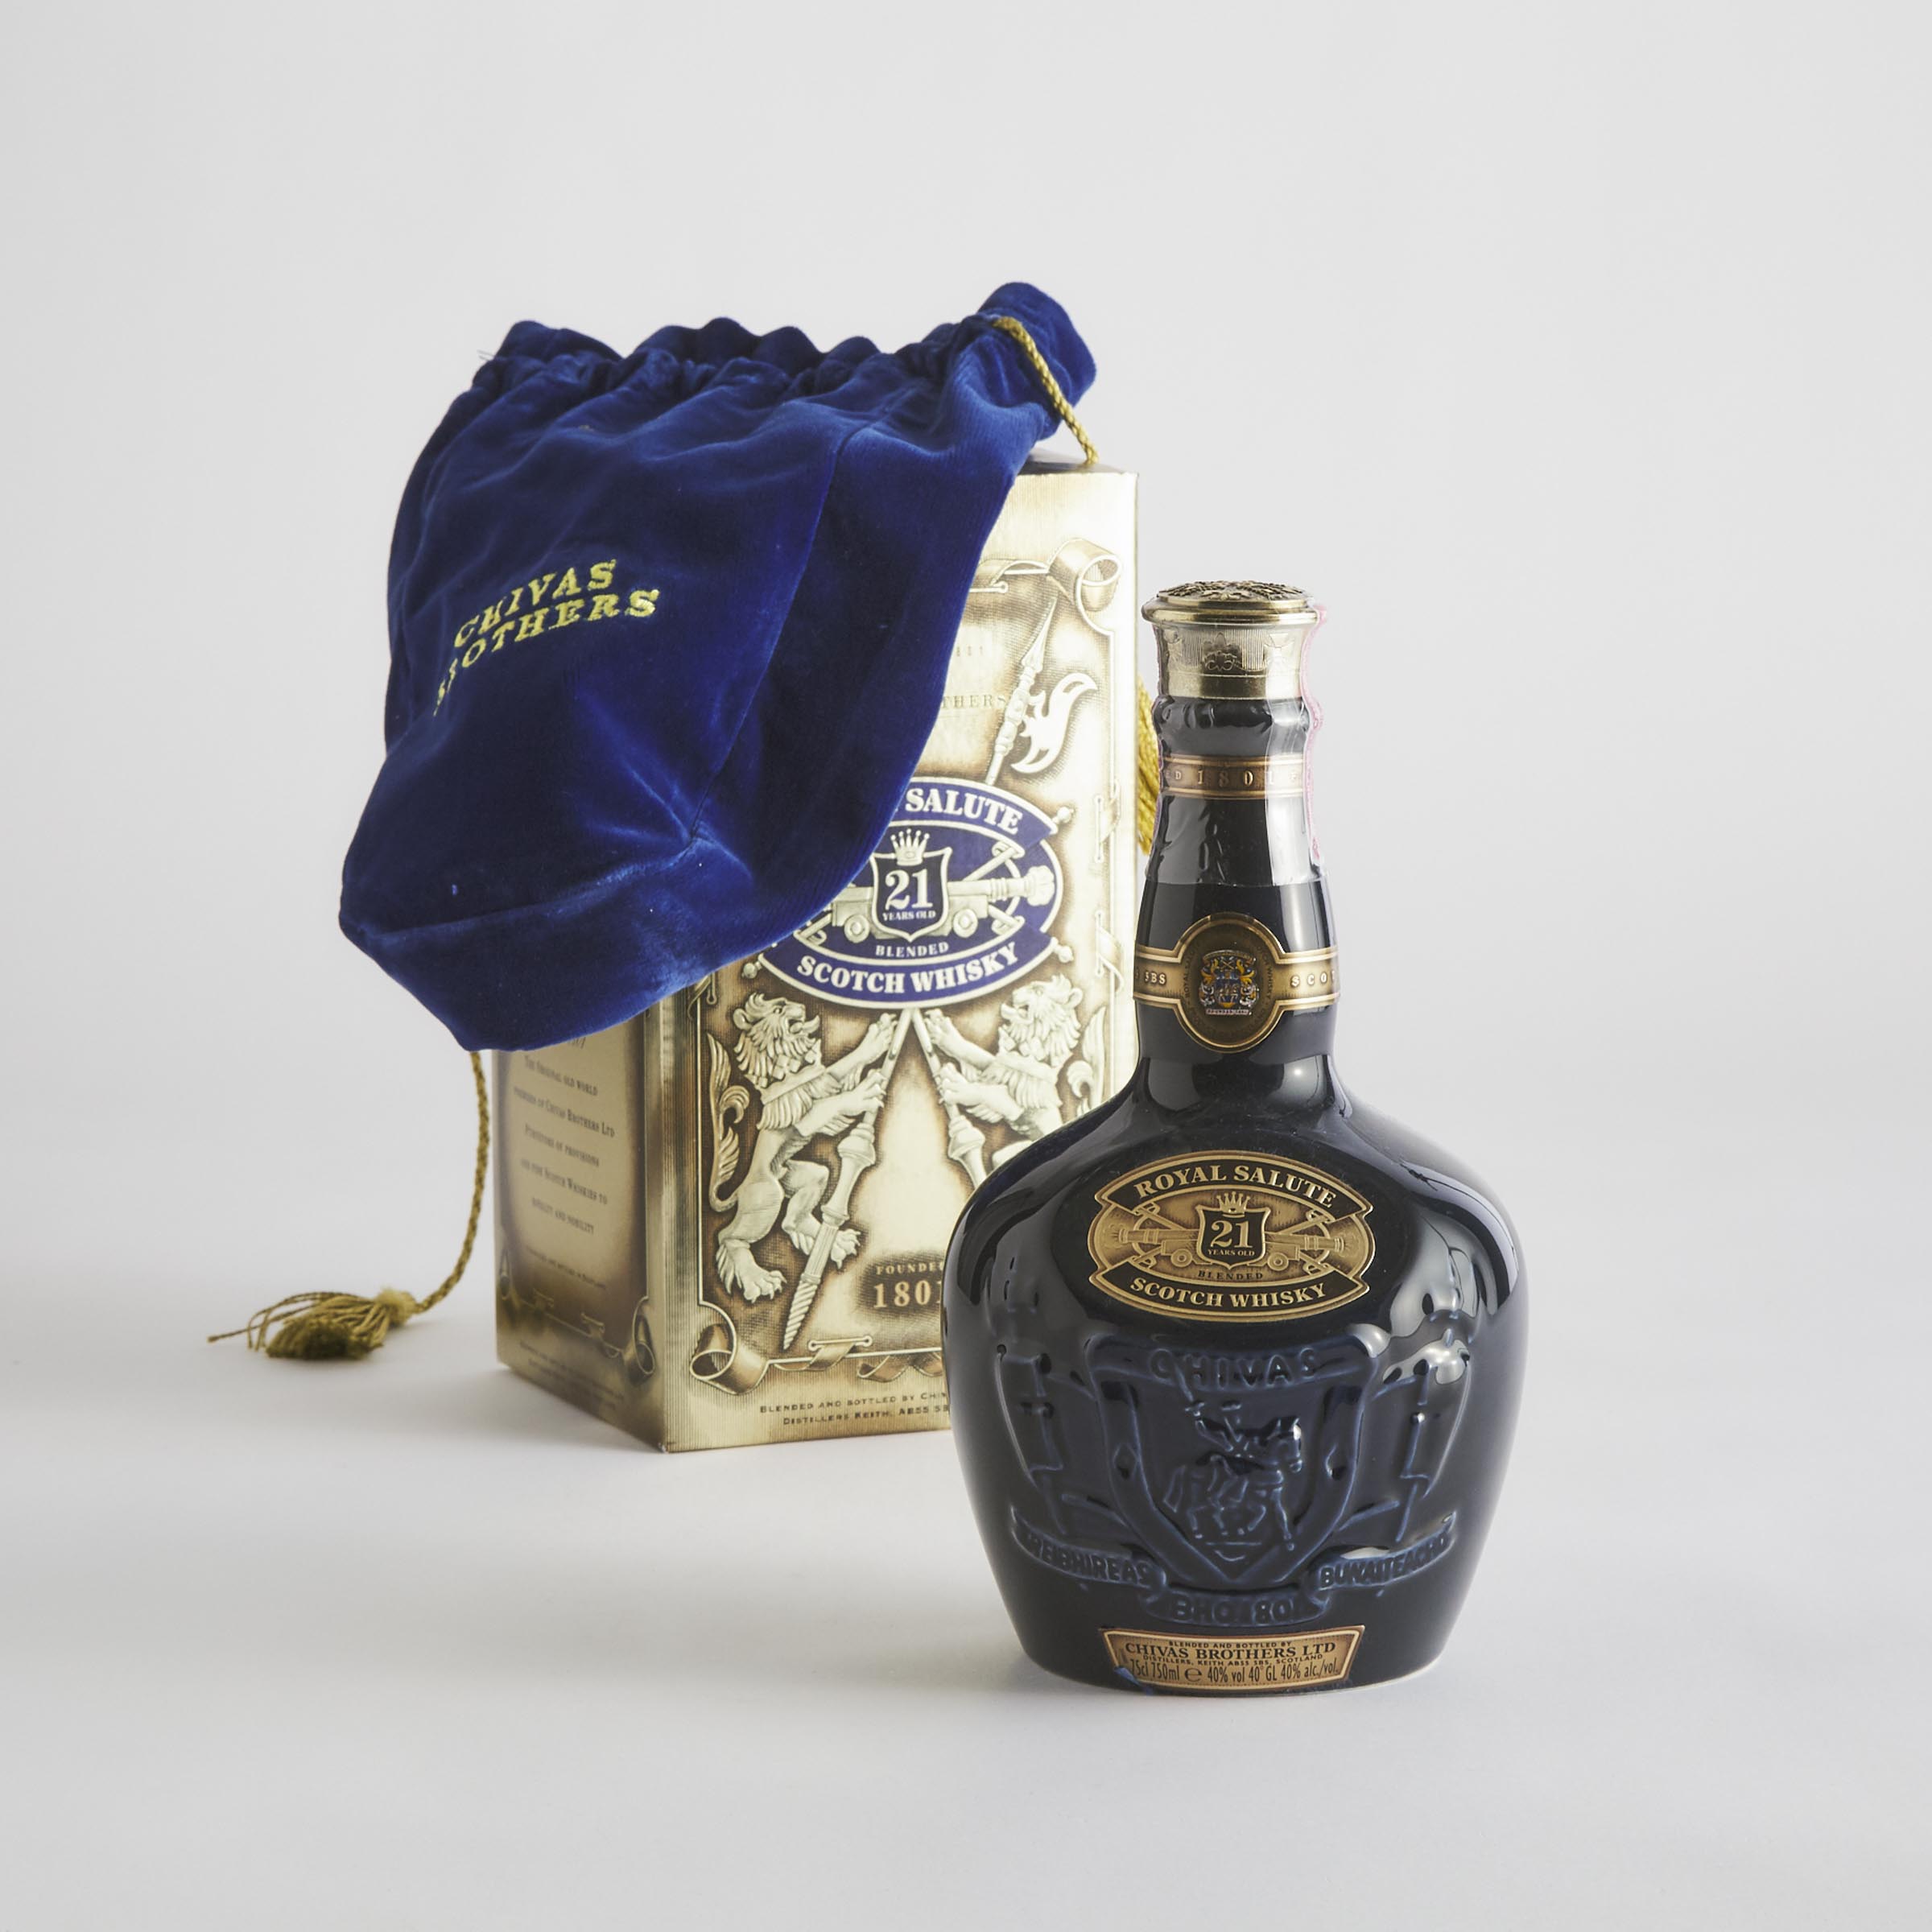 CHIVAS ROYAL SALUTE BLENDED SCOTCH WHISKY 21 YEARS (ONE 750 ML)